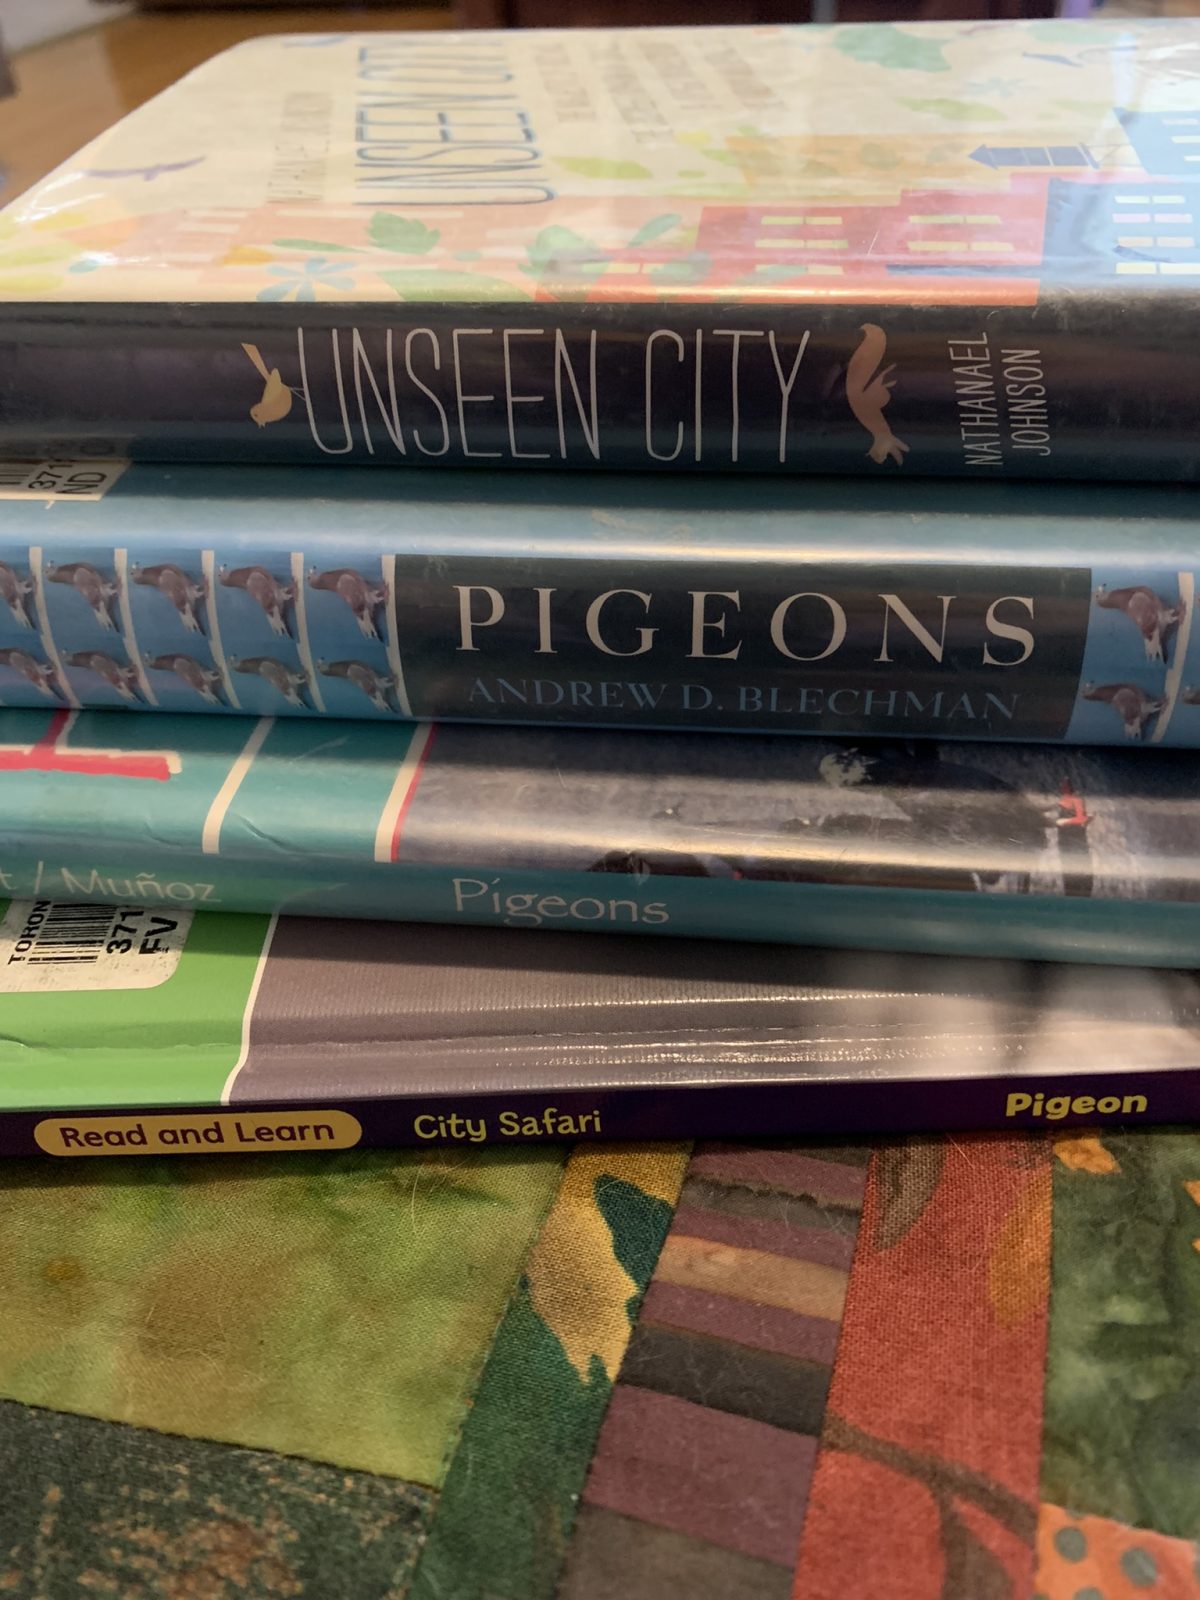 A stack of four books about pigeons